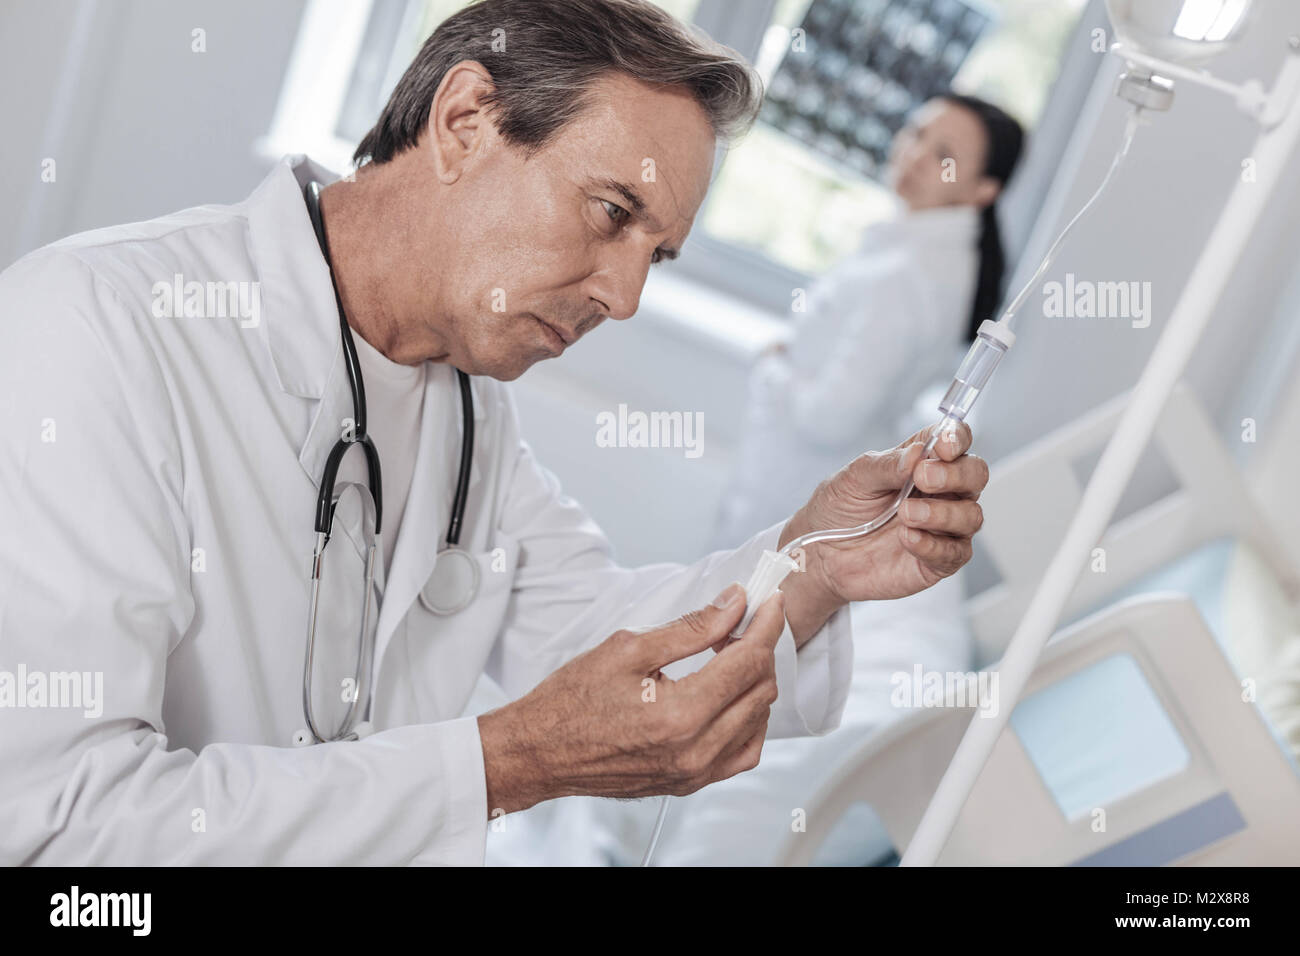 Concentrated physician checking drop counter in hospital Stock Photo